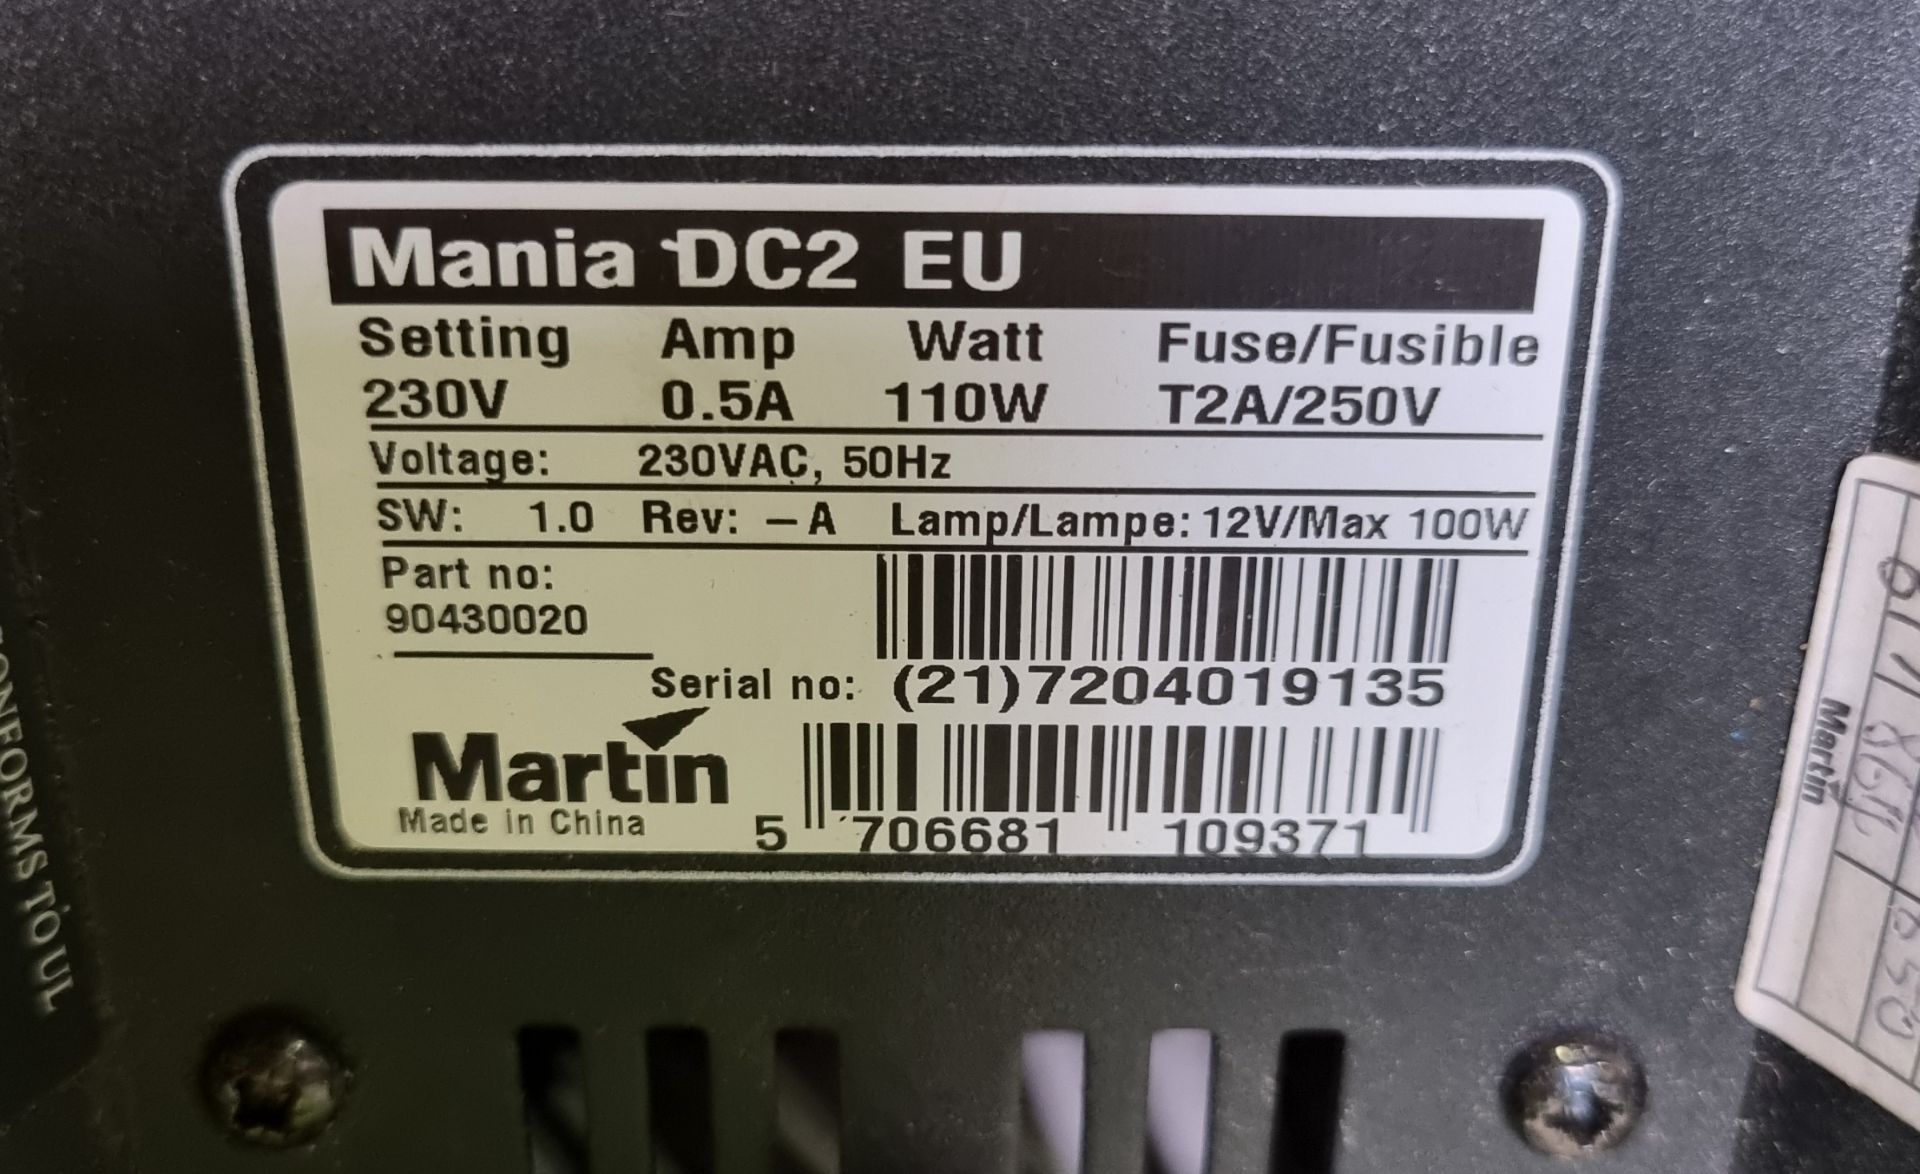 2x Martin DC2 Mania Fire Effect light projectors with lamps, 13A mains cables - Image 4 of 4